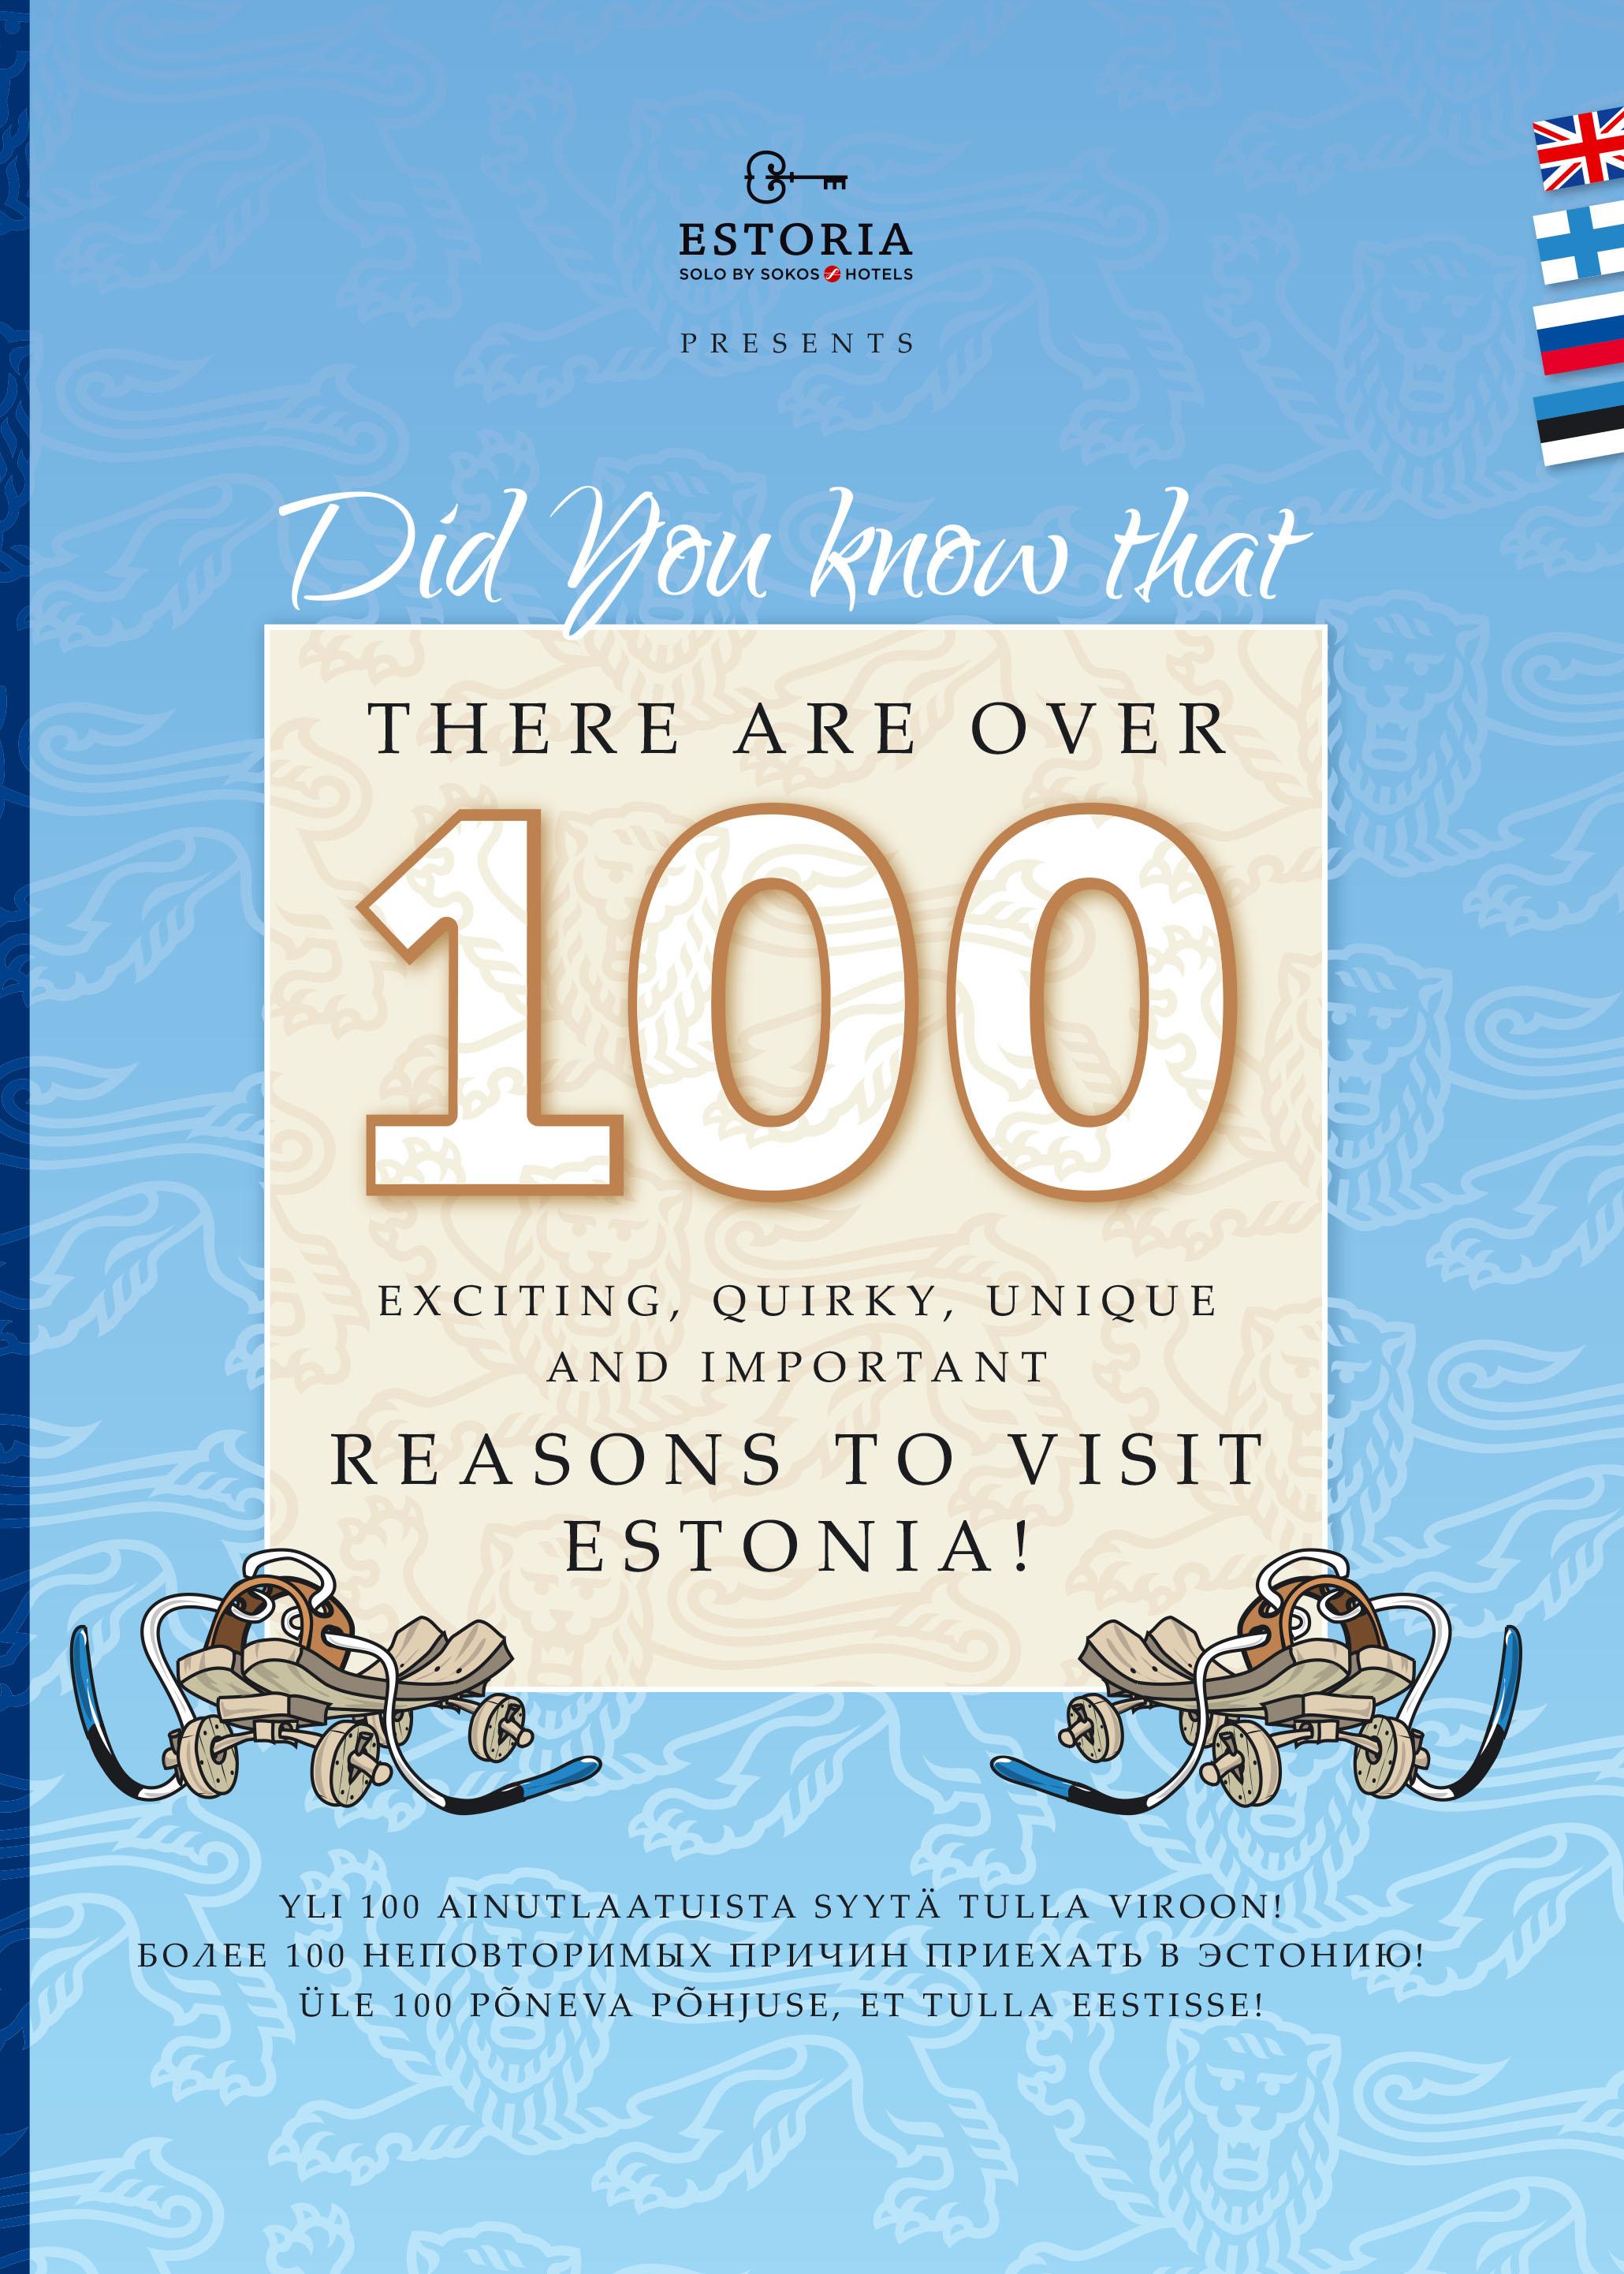 OVER 100 EXCITING REASONS TO VISIT ESTONIA!